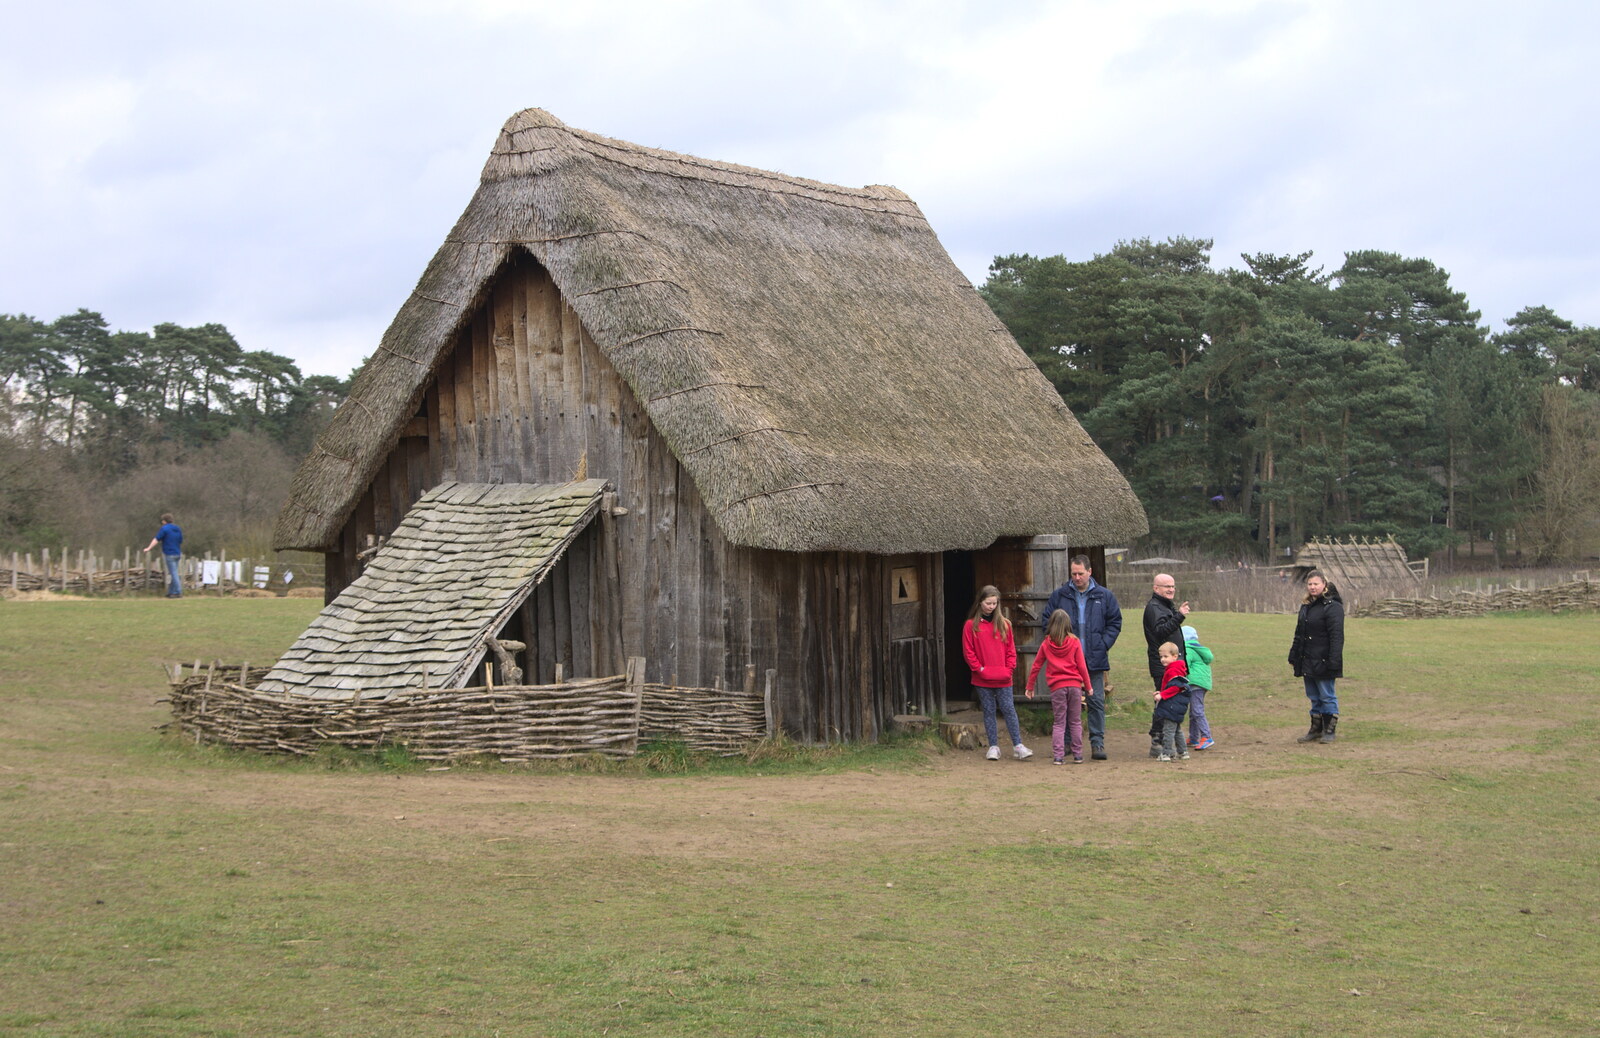 One of the reconstructed buildings from An Anglo-Saxon Village, West Stow, Suffolk - 19th February 2017